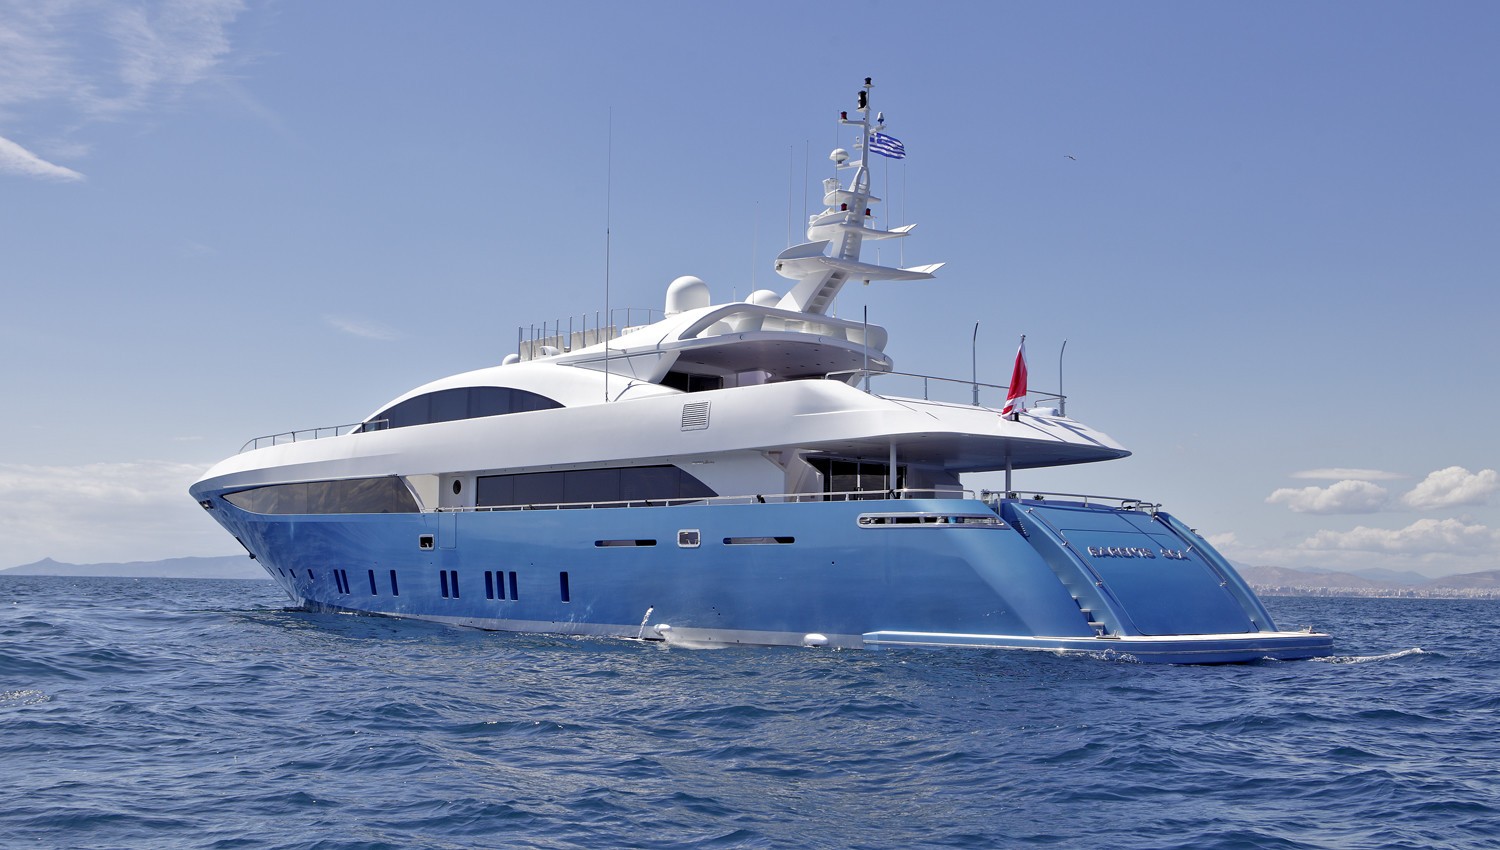 Sea Wolf The 41m Yacht Barents Sea Luxury Yacht Browser By